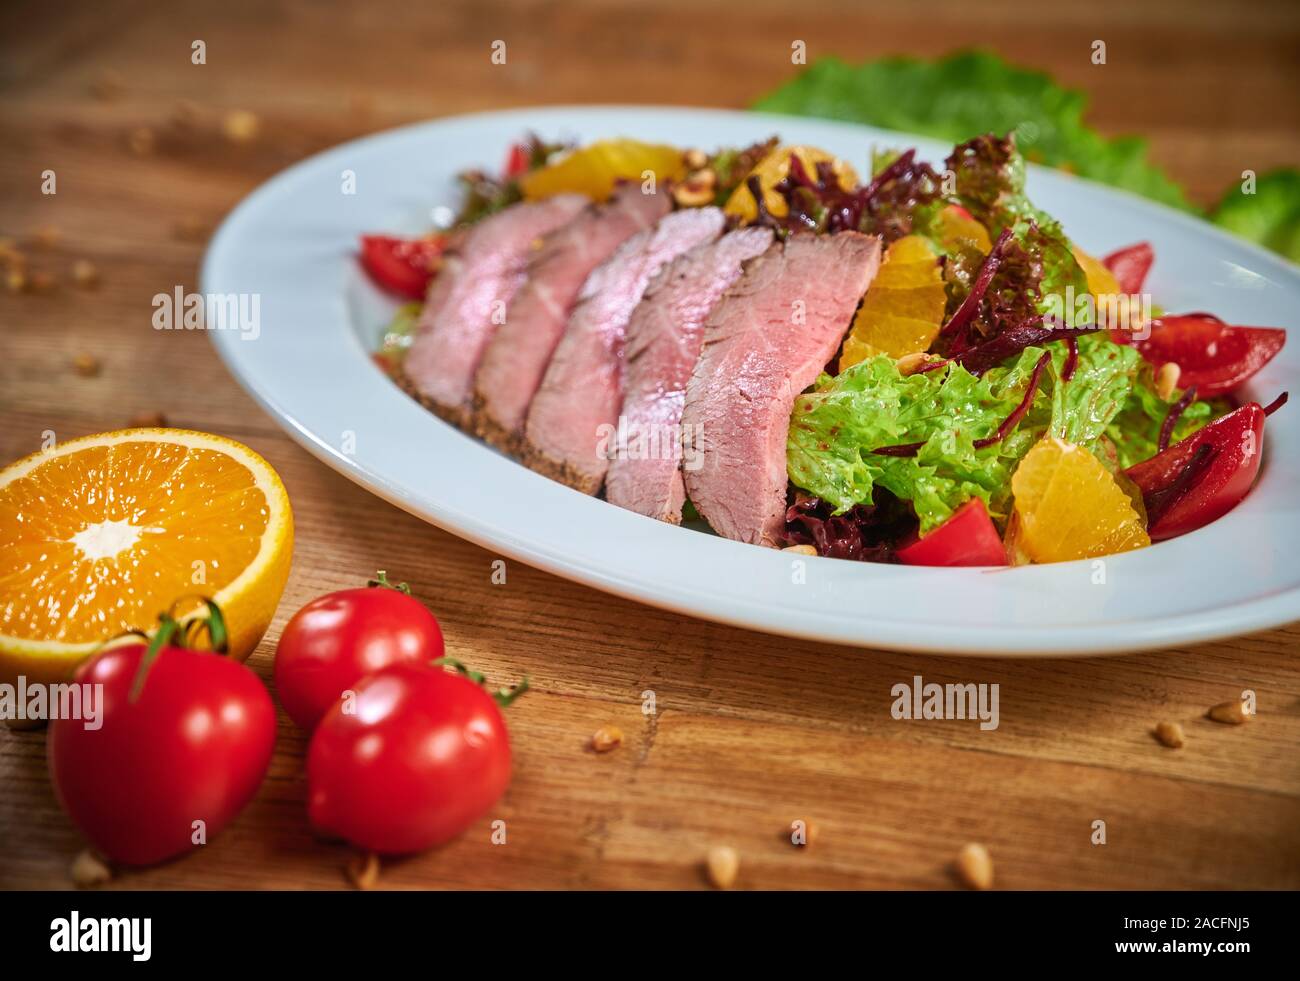 Plate with mouthwatering gourmet dish with roasted duck breast and salad with vegetable Stock Photo